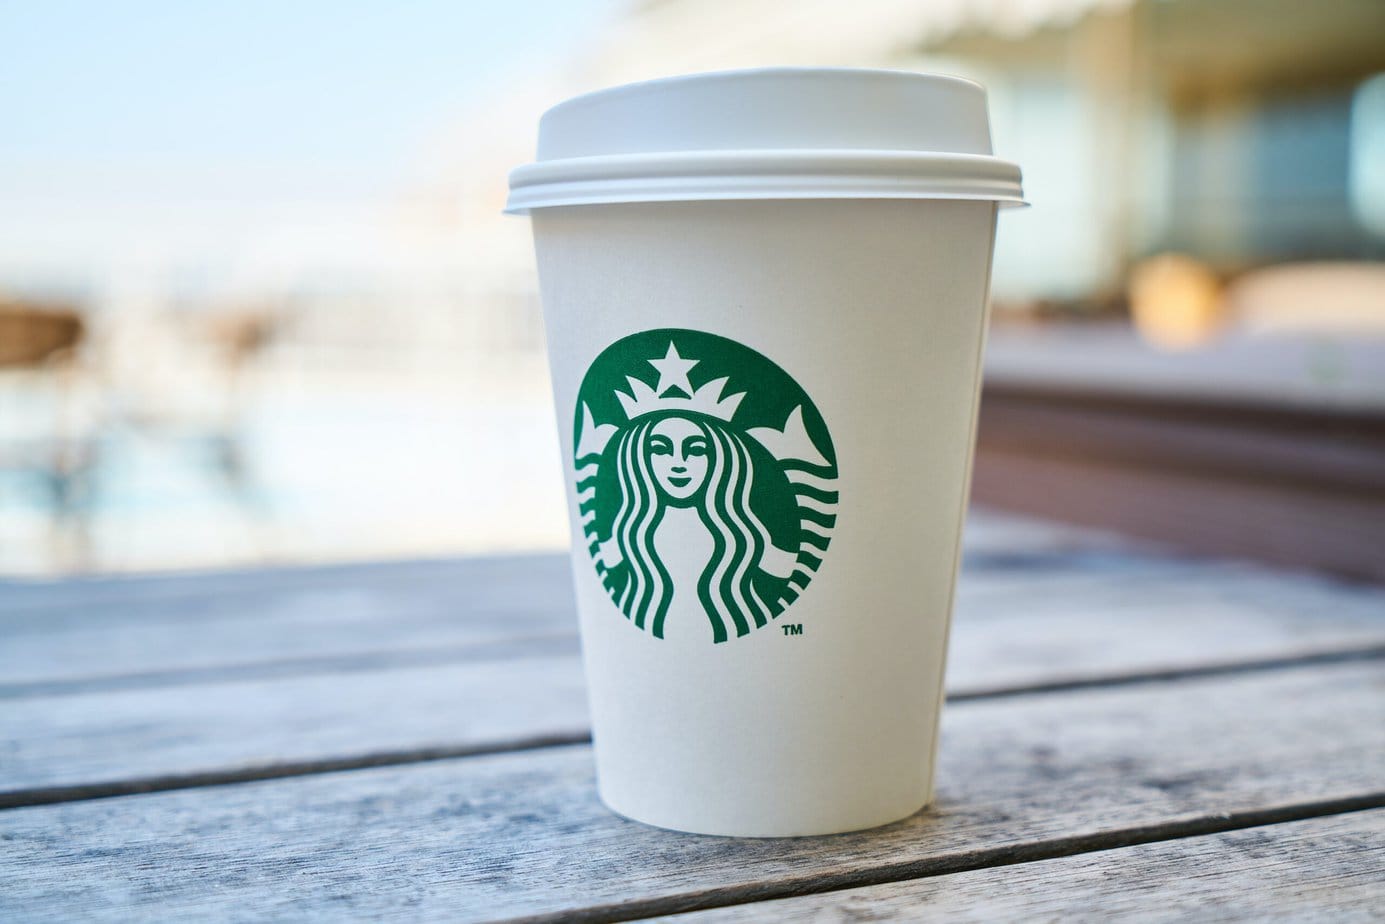 Paper cup with a Starbucks logo